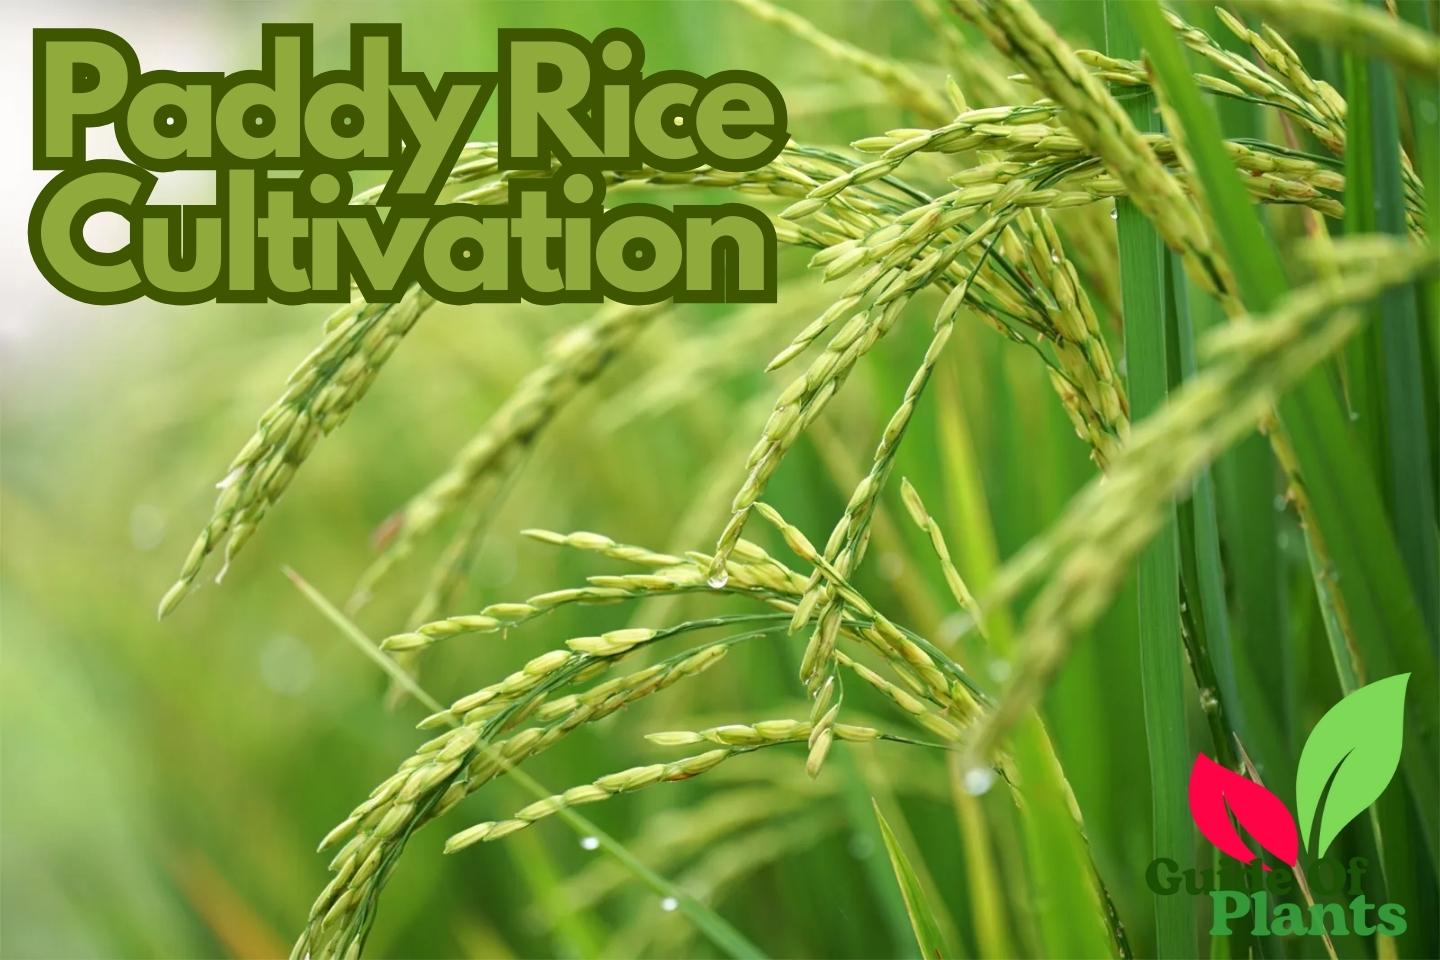 Paddy Rice Cultivation